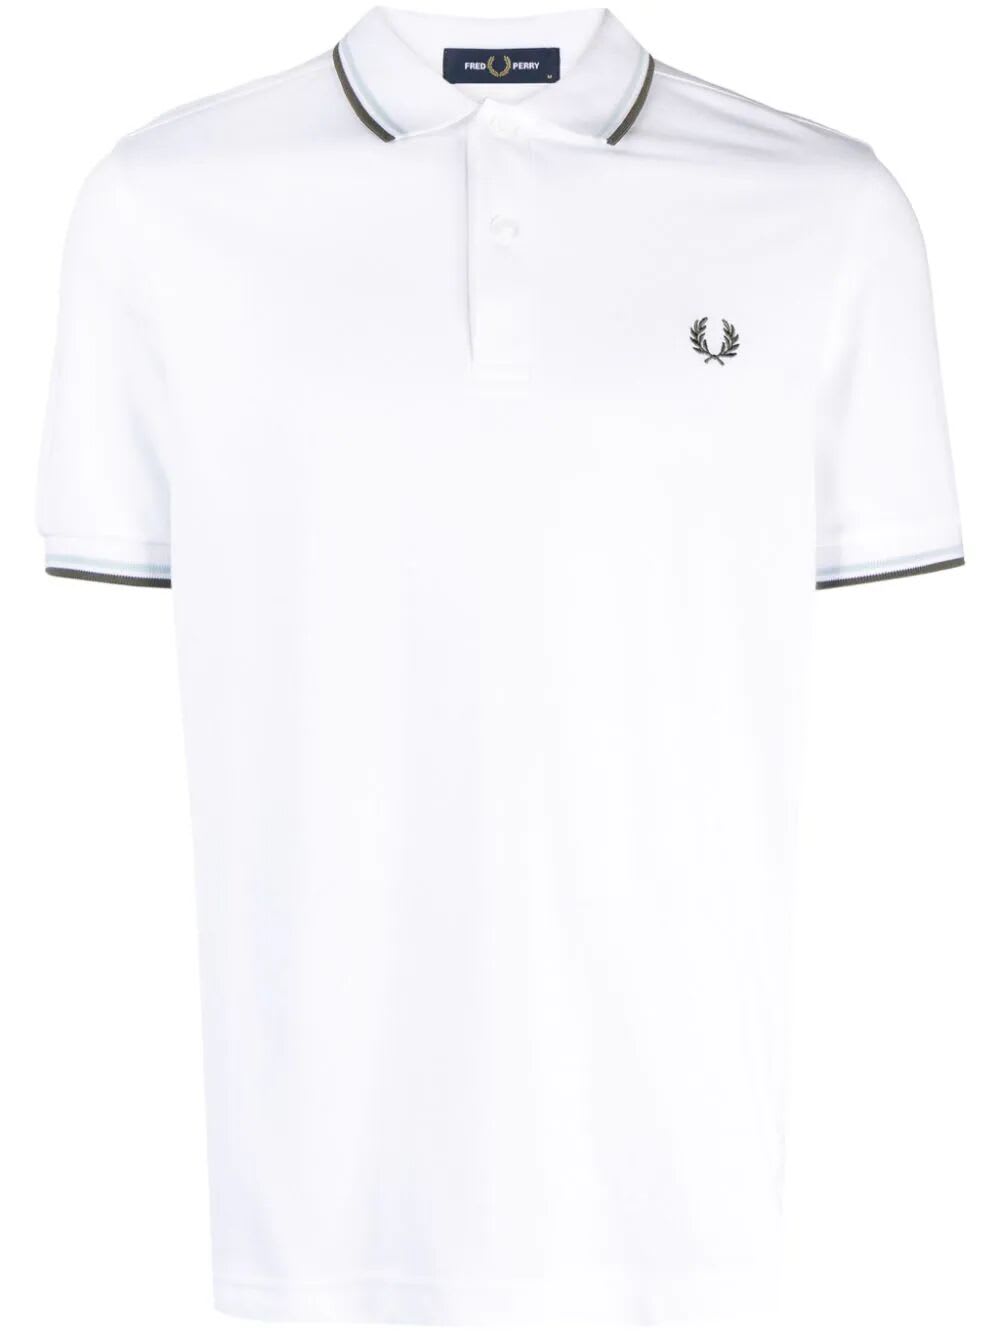 Shop Fred Perry Fp Twin Tipped Shirt In Wht Lgtice Fdgrn